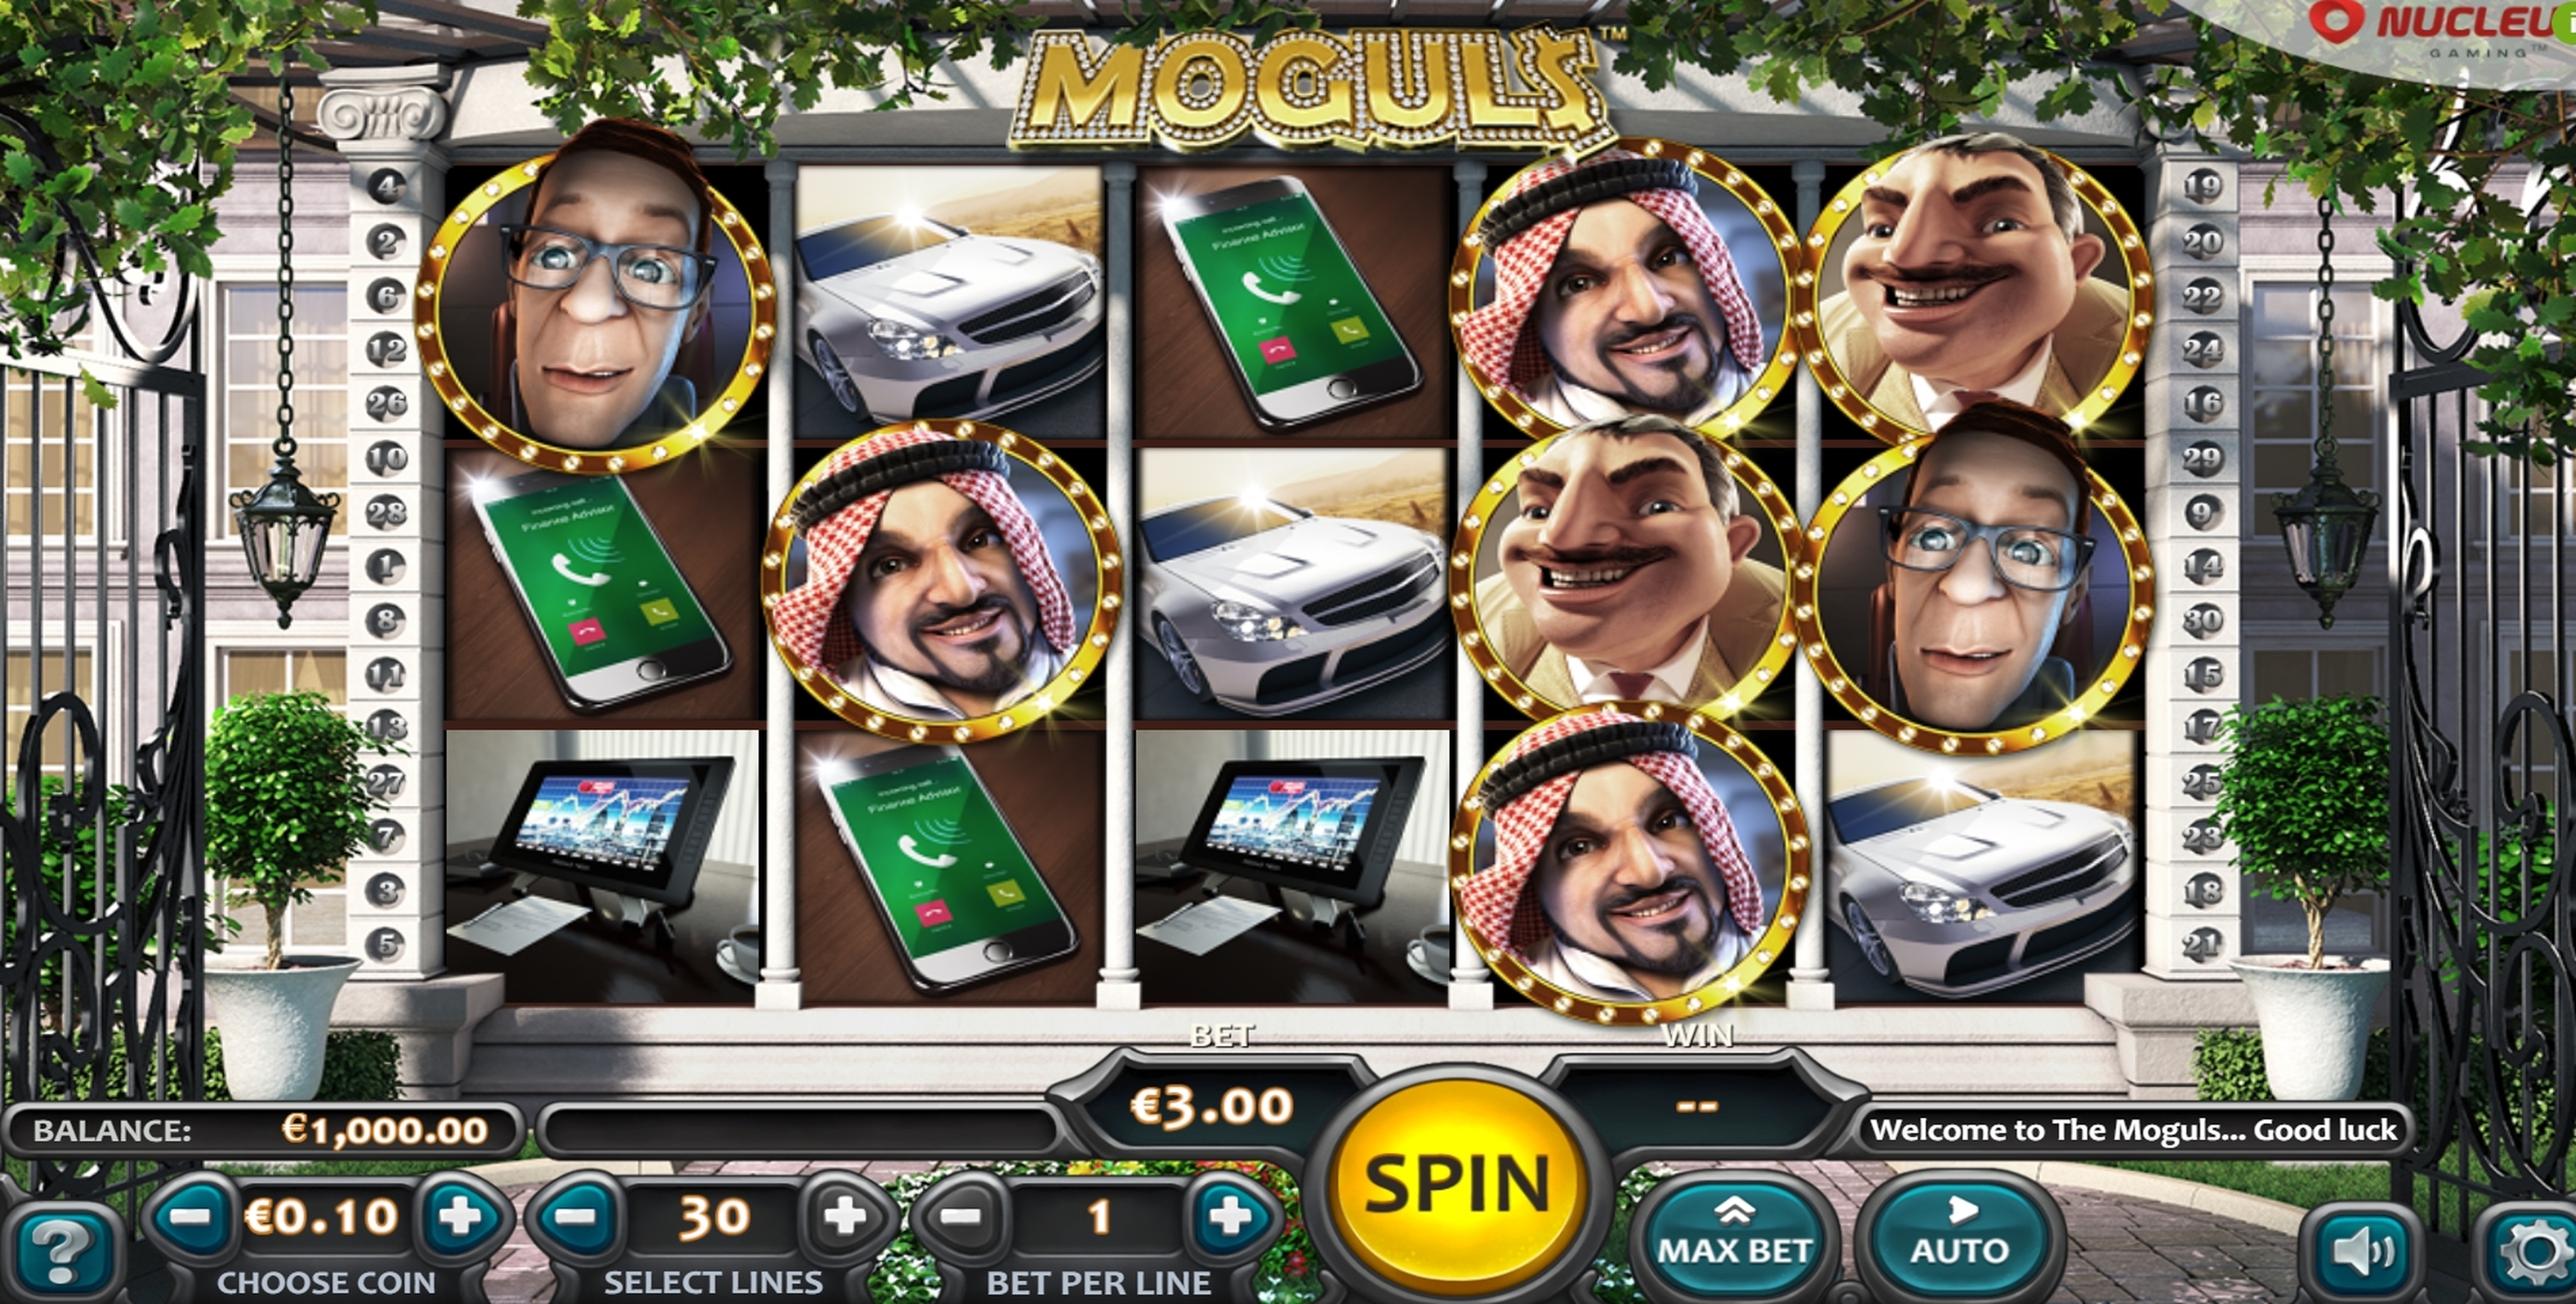 Reels in The Moguls Slot Game by Nucleus Gaming